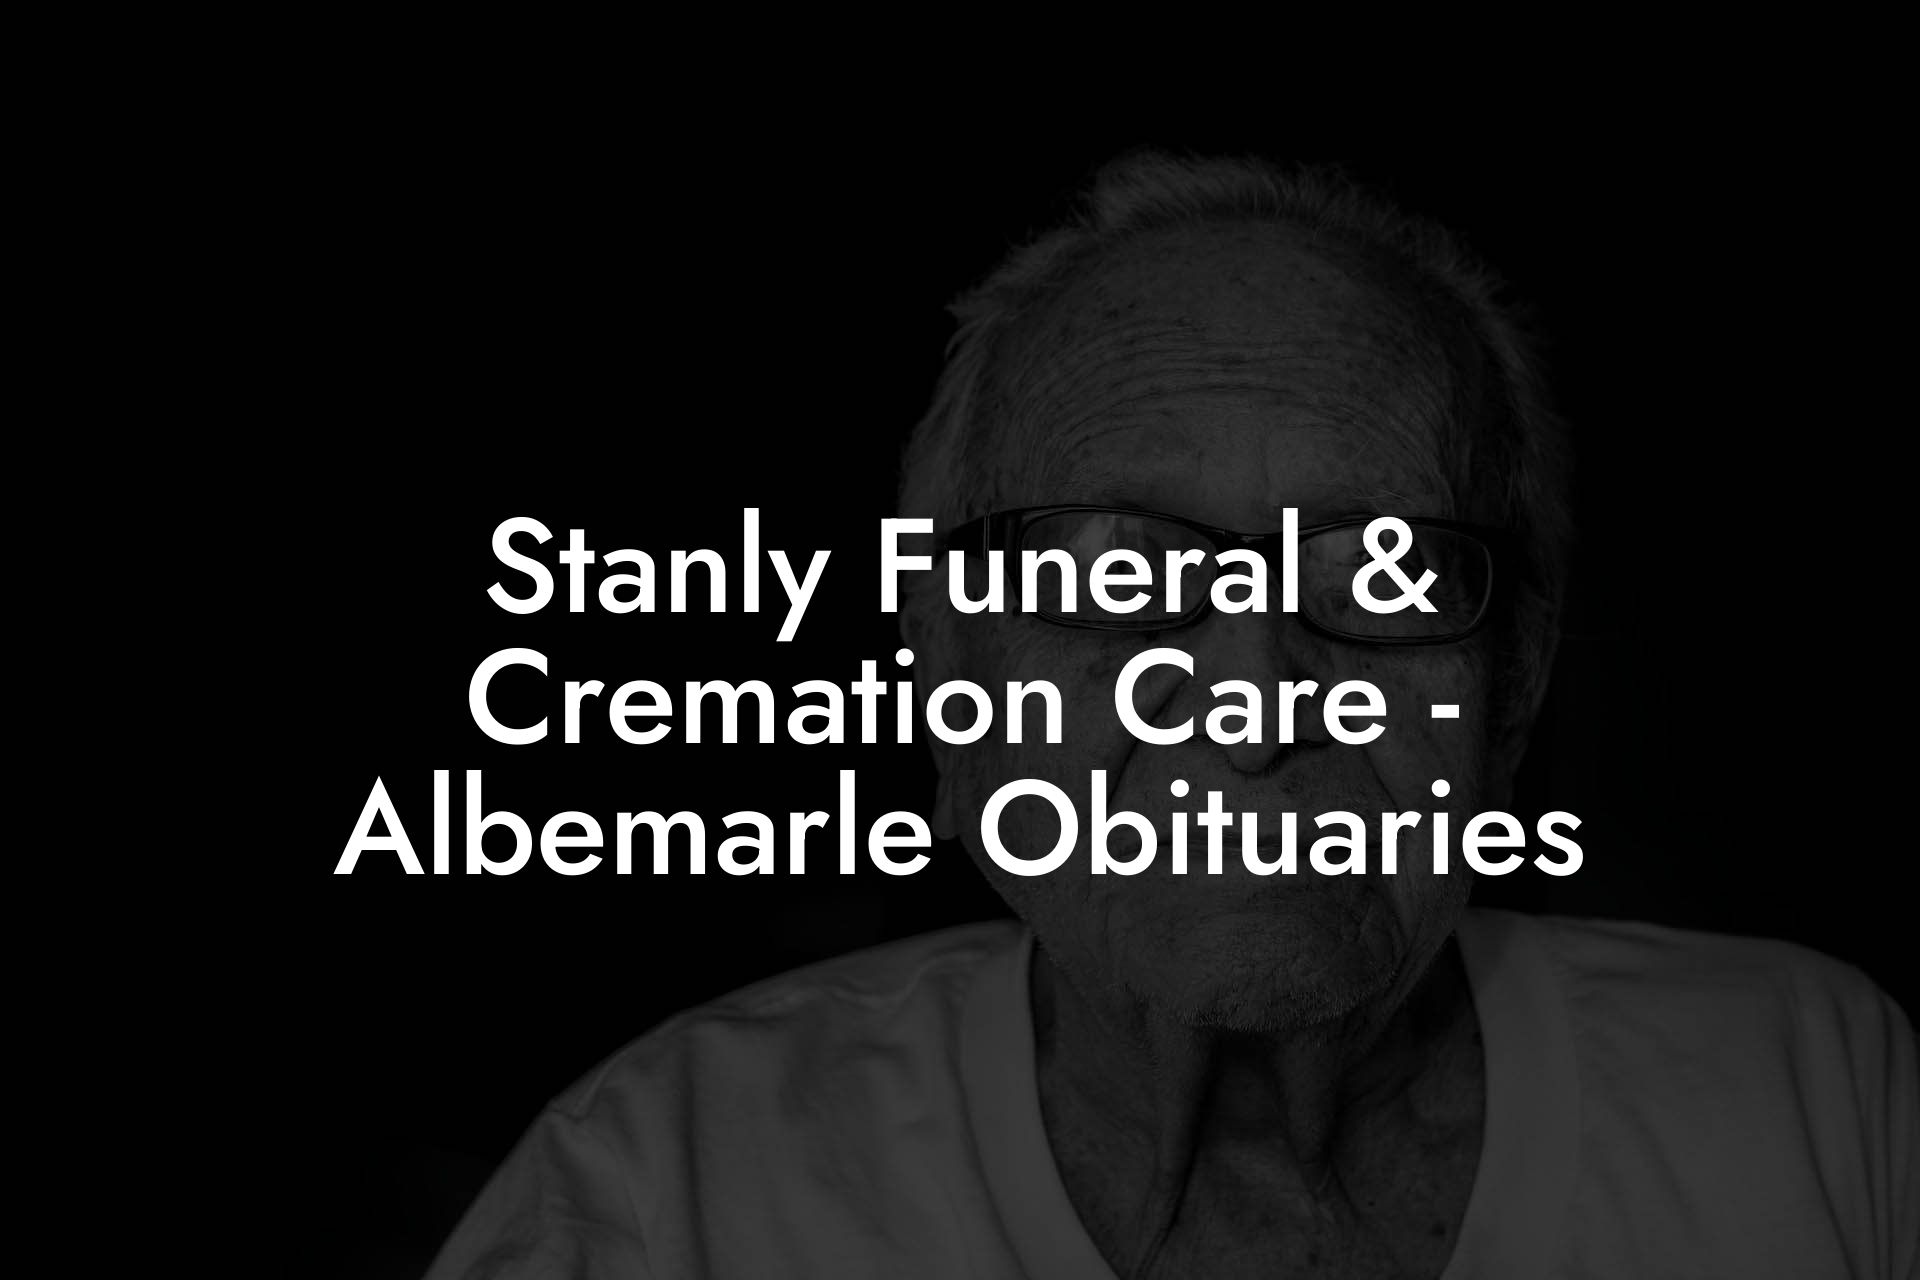 Stanly Funeral & Cremation Care - Albemarle Obituaries